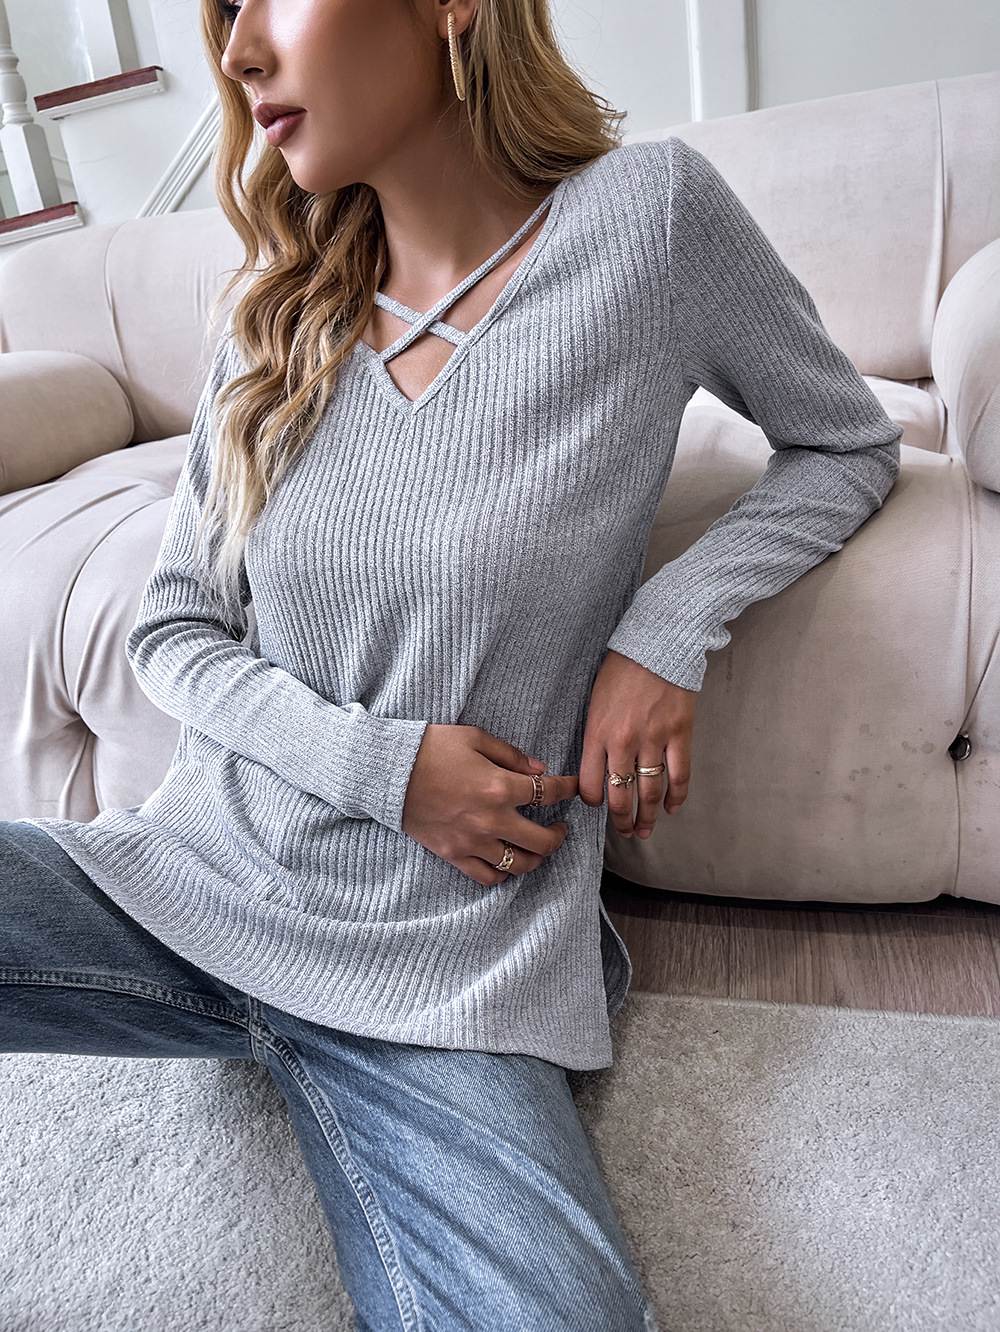  V-neck hollow casual long-sleeved pit strip top nihaostyles wholesale clothing NSDF84895